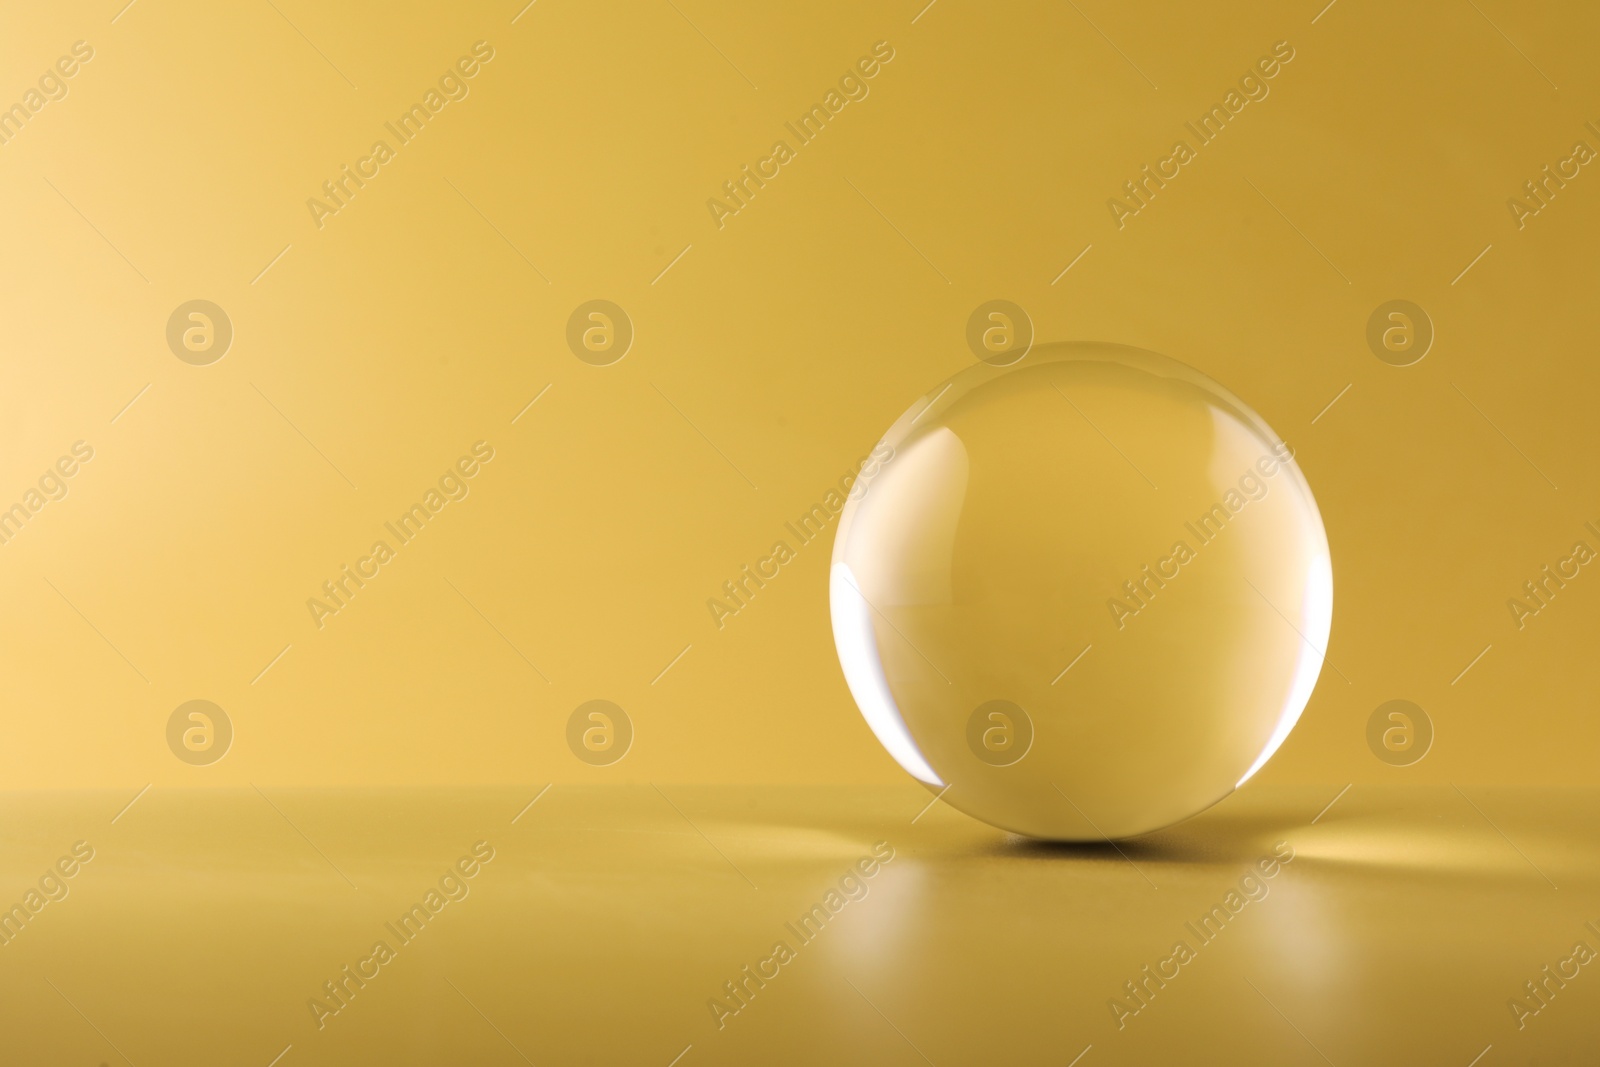 Photo of Transparent glass ball on yellow background. Space for text